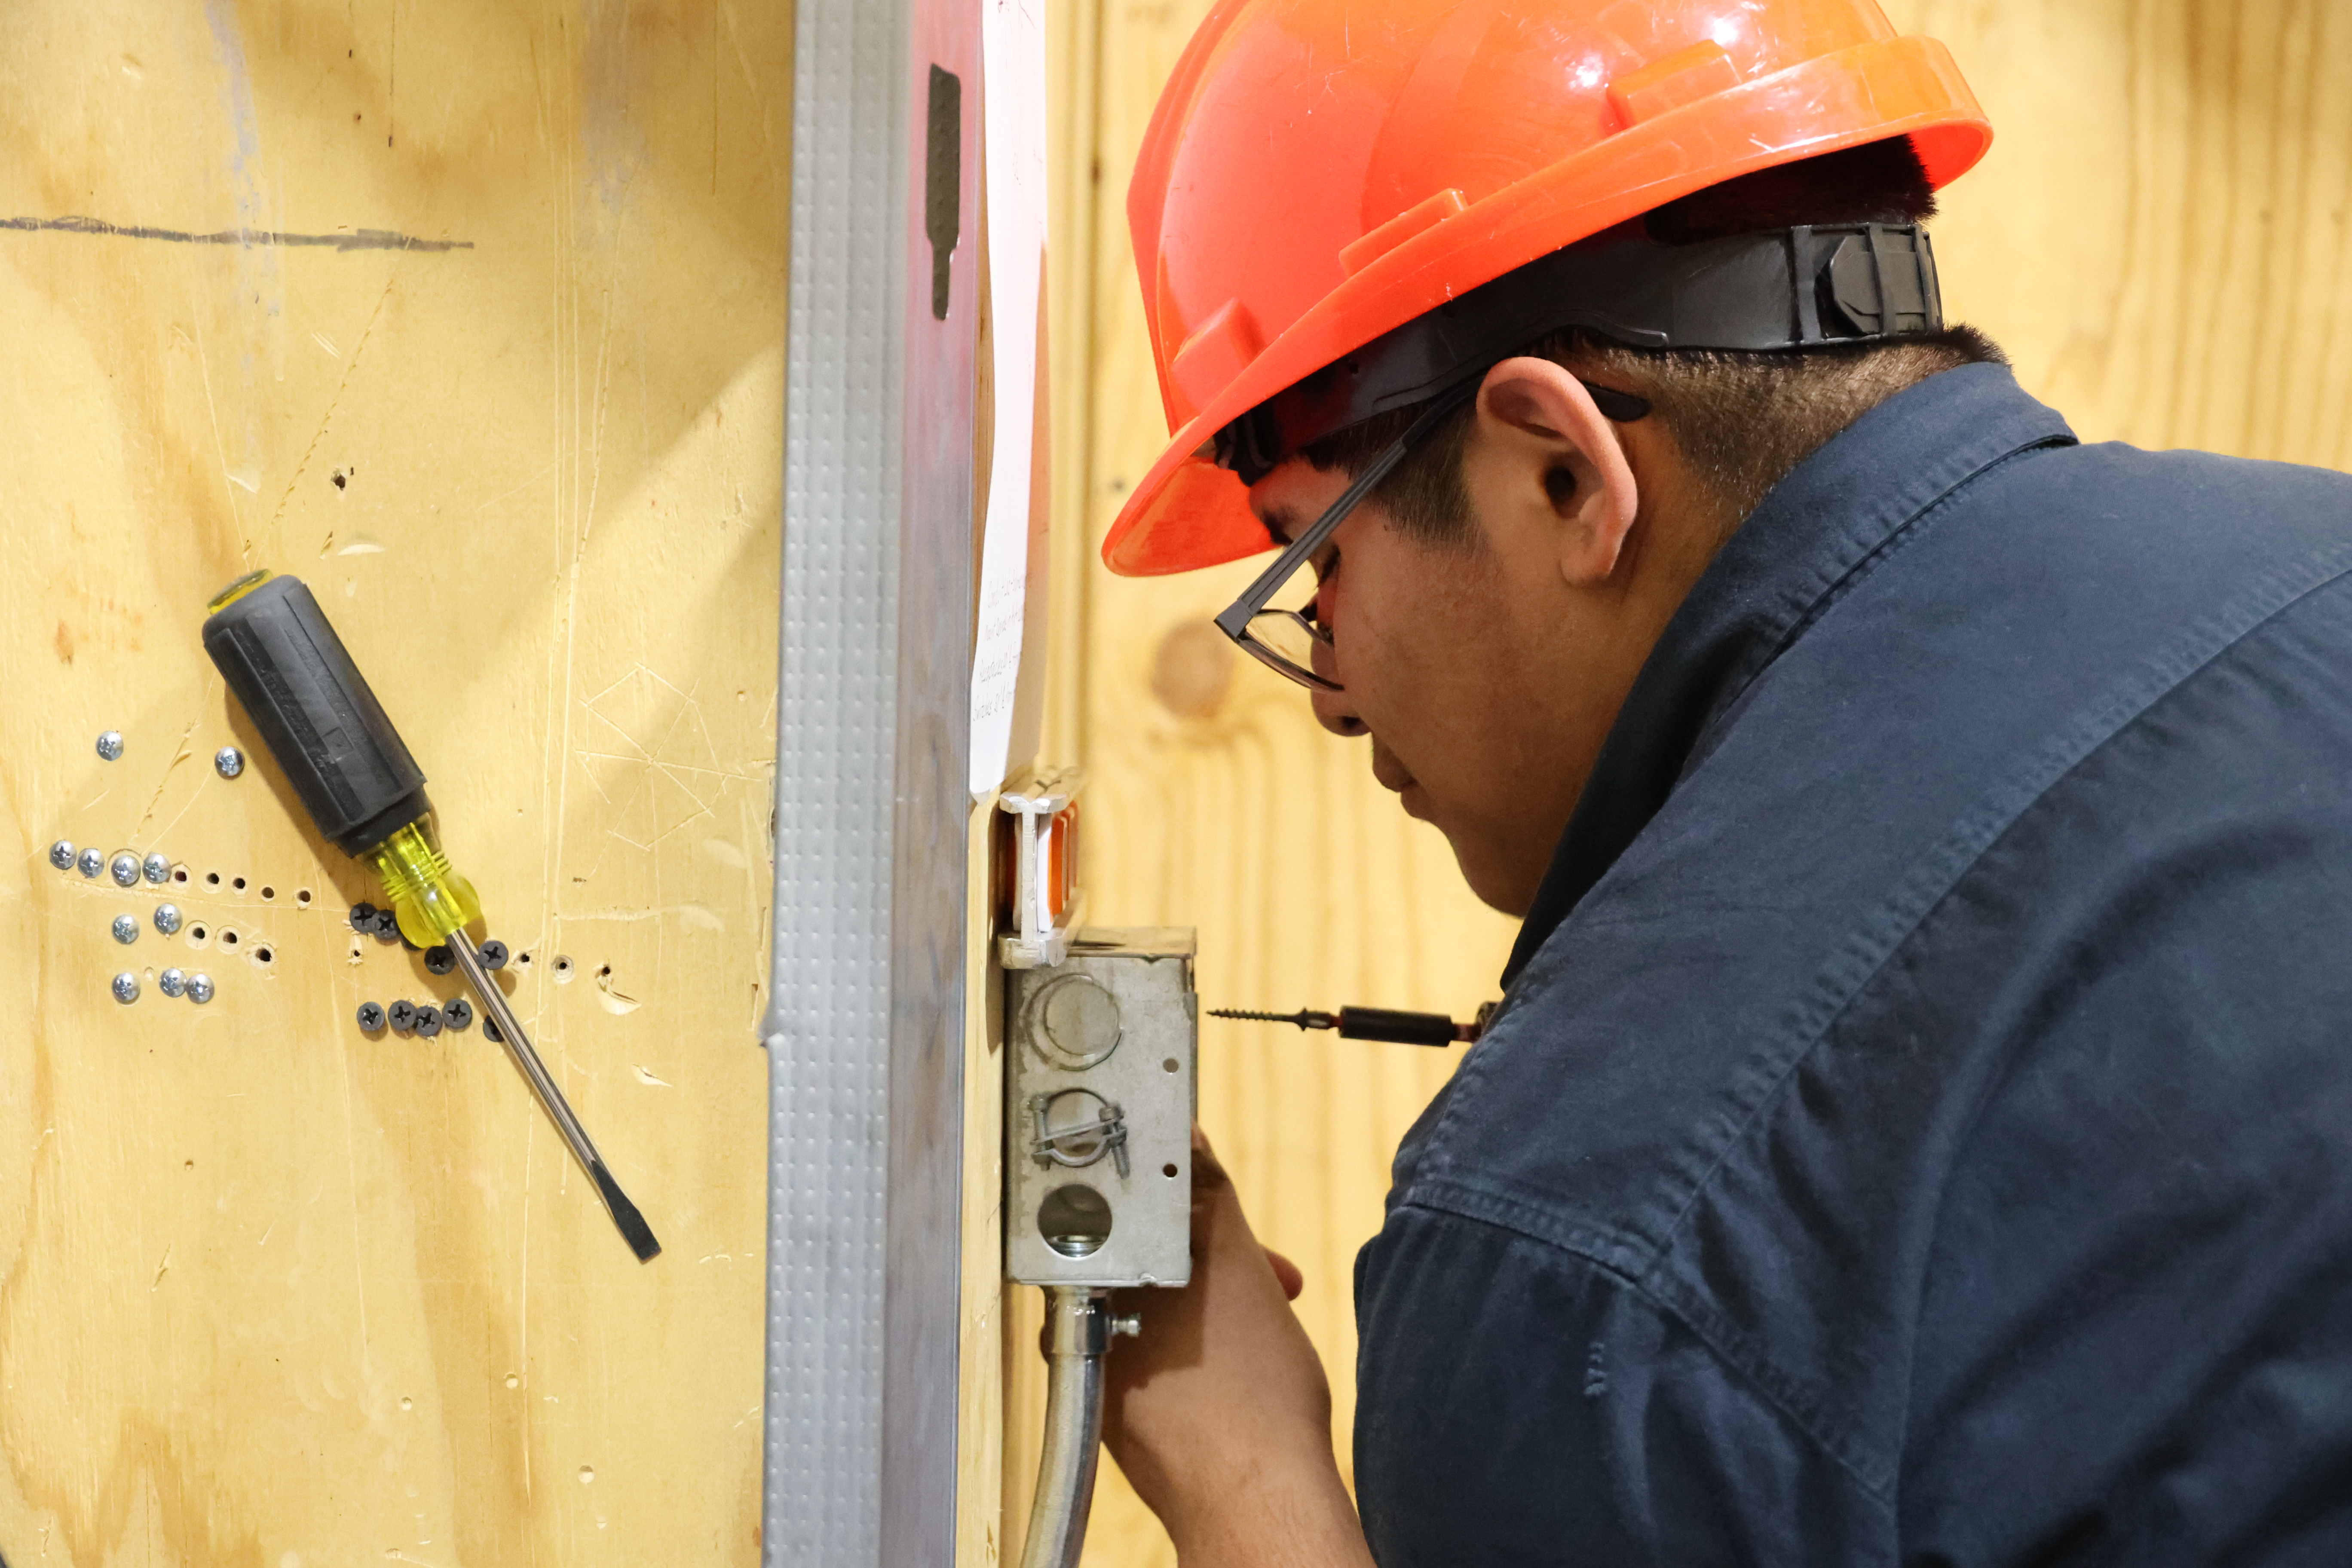 A Hispanic male student lines up a screw before using a hand drill to screw it into his workstation wall.